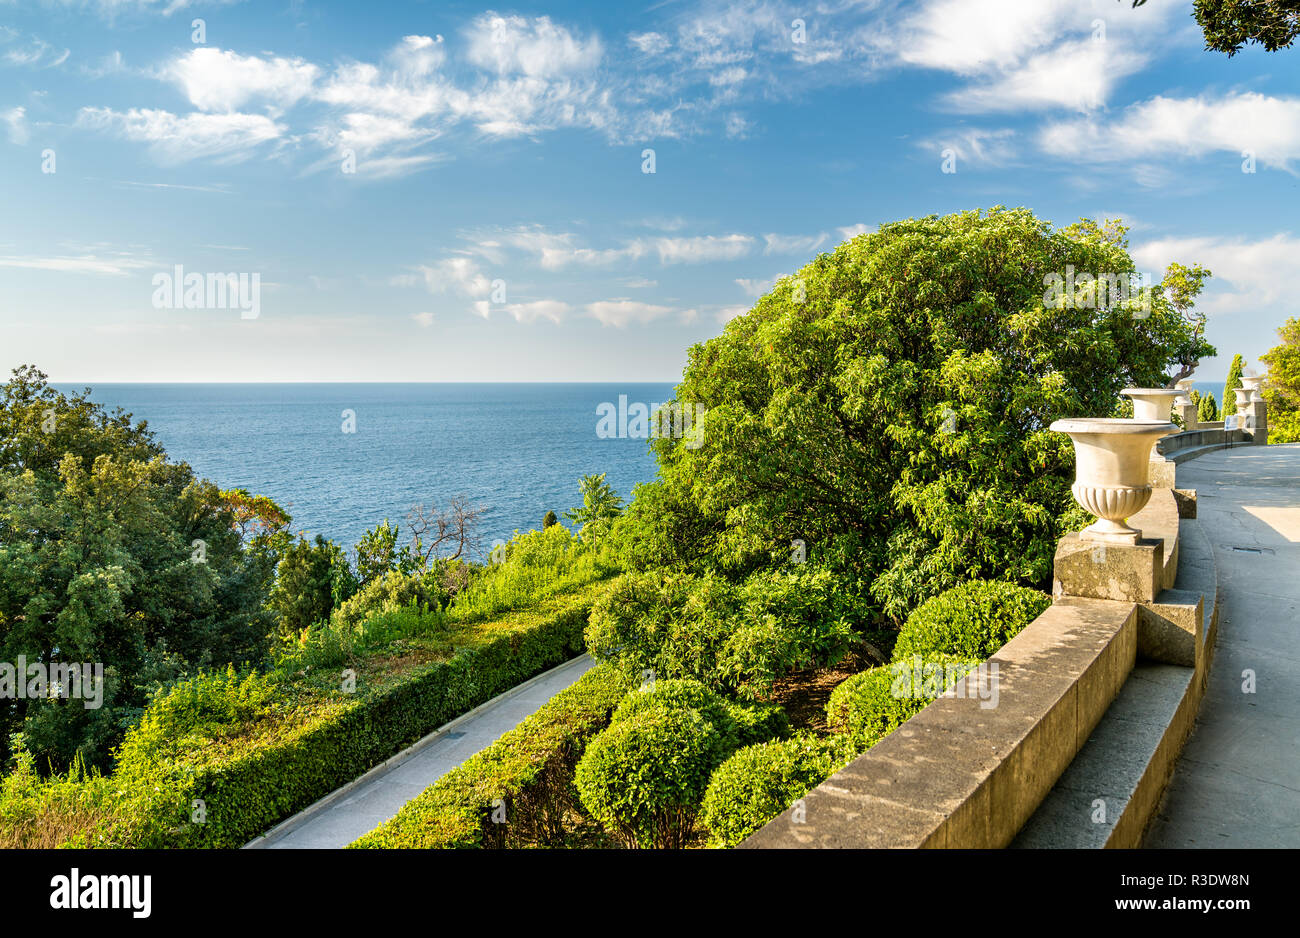 View of the Black Sea from the Vorontsov Palace in Alupka, Crimea Stock Photo